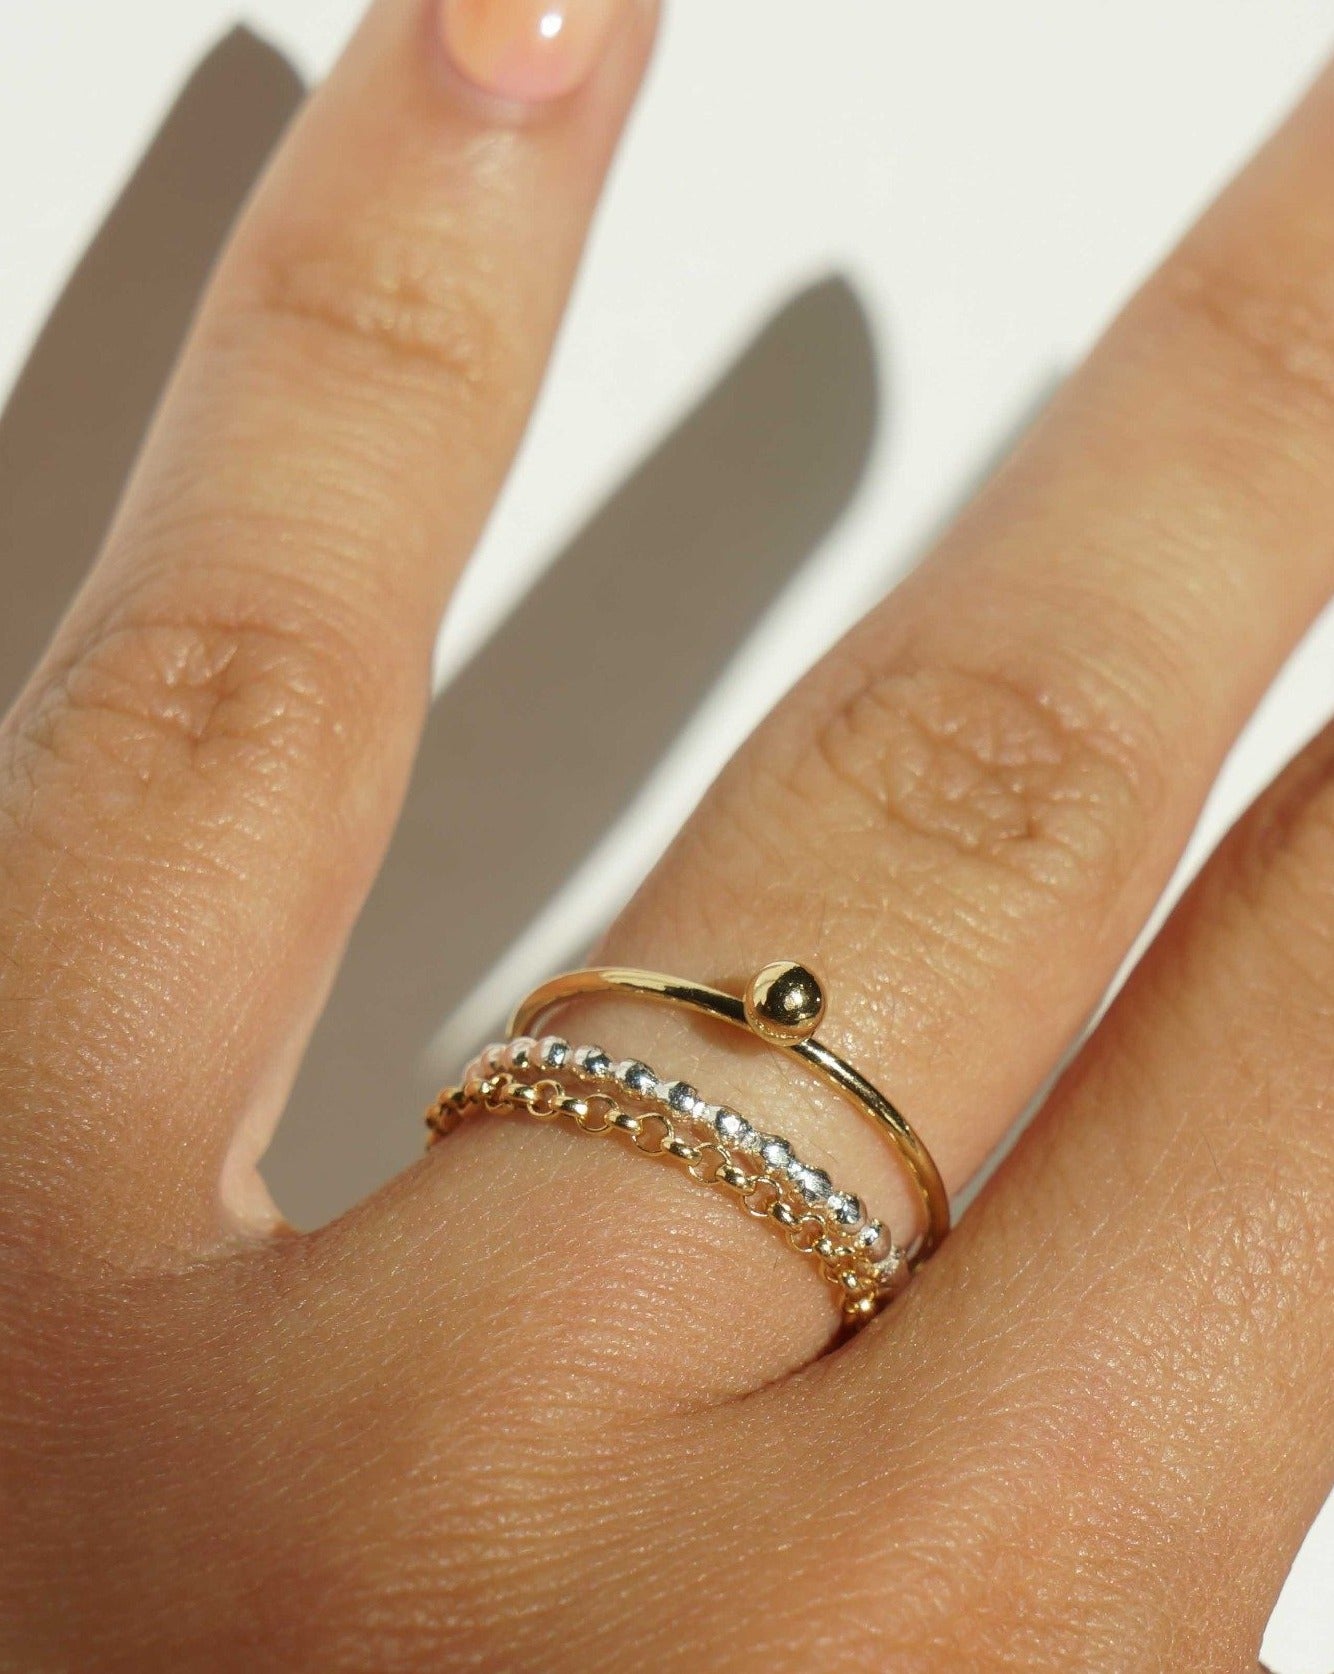 Point Ring by KOZAKH. A ring crafted in 14K Gold Filled, featuring a 3mm seamless bead.